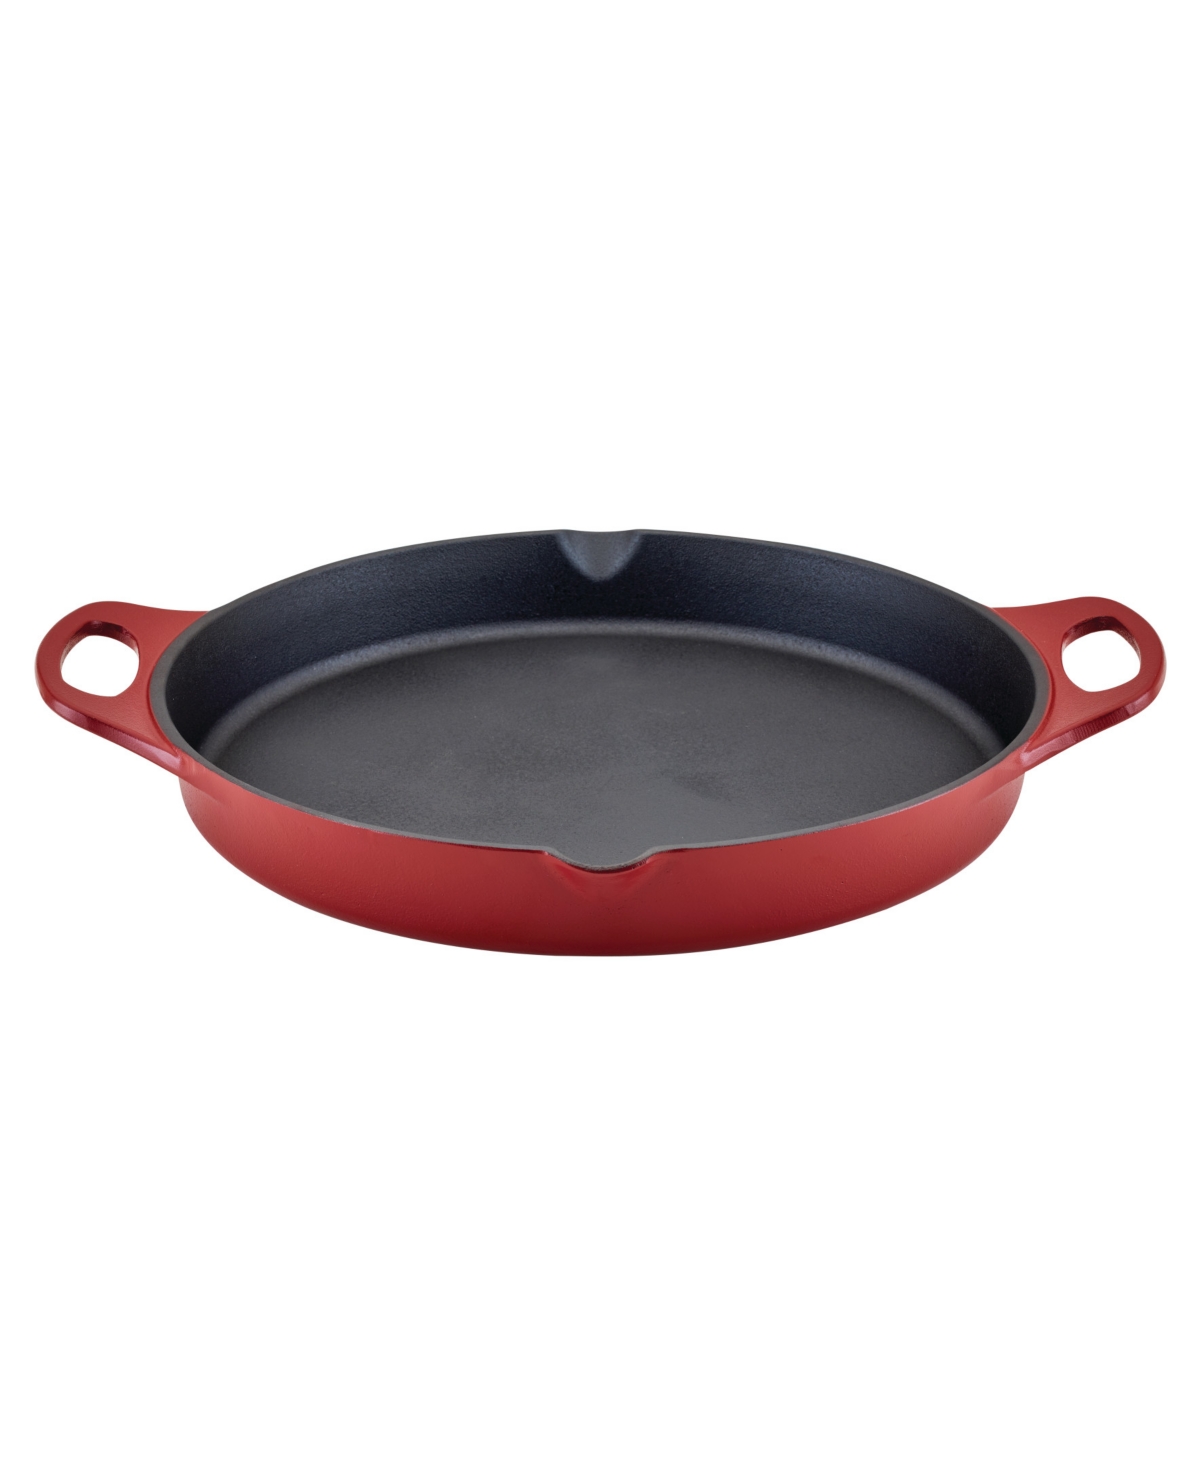 Rachael Ray Nitro Cast Iron 14" Skillet With Side Handles In Red